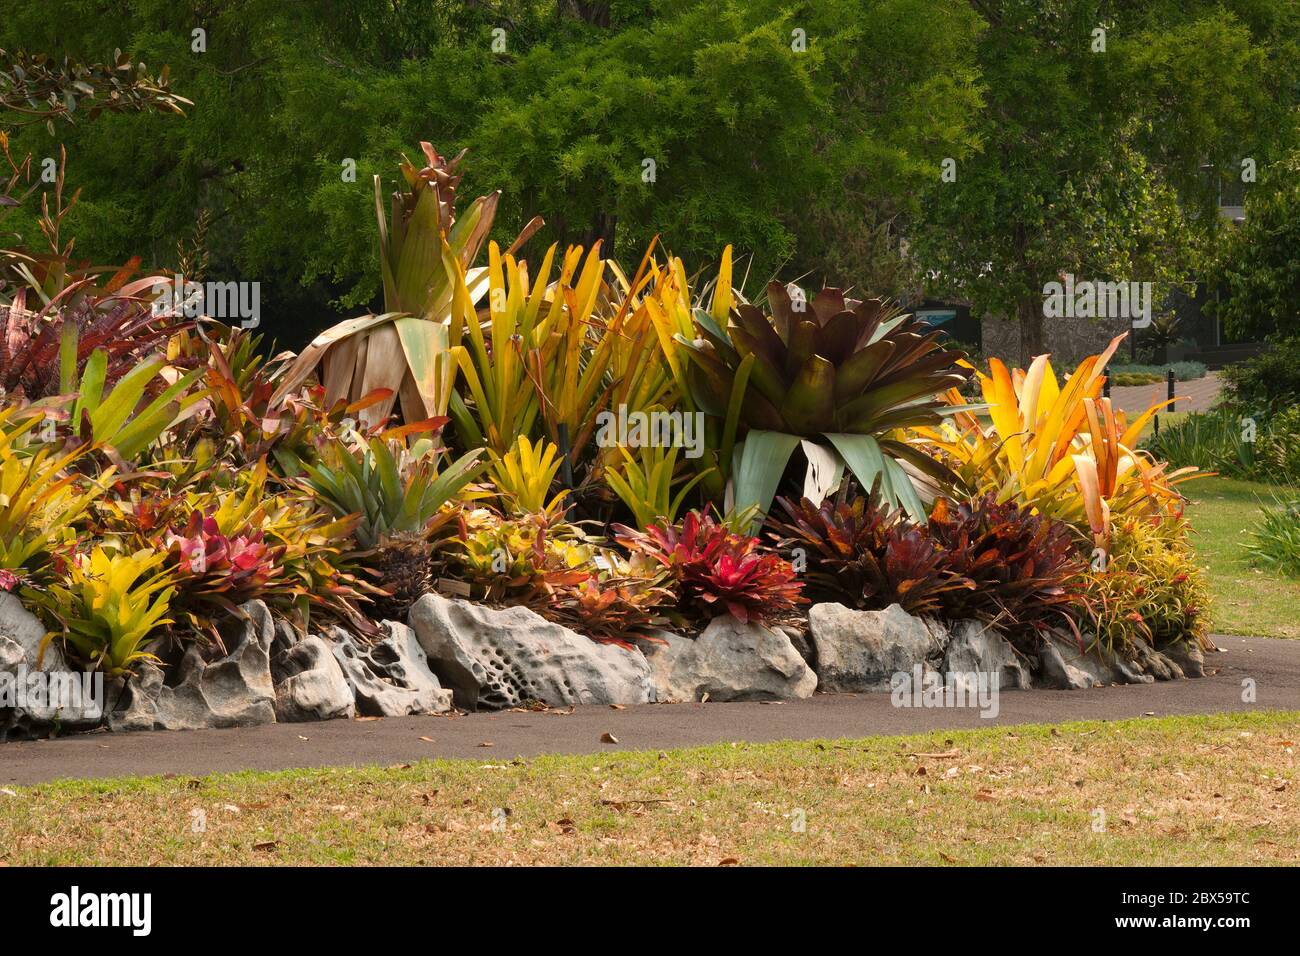 Sydney Australia,  garden of bromeliad plants with colorful leaves Stock Photo